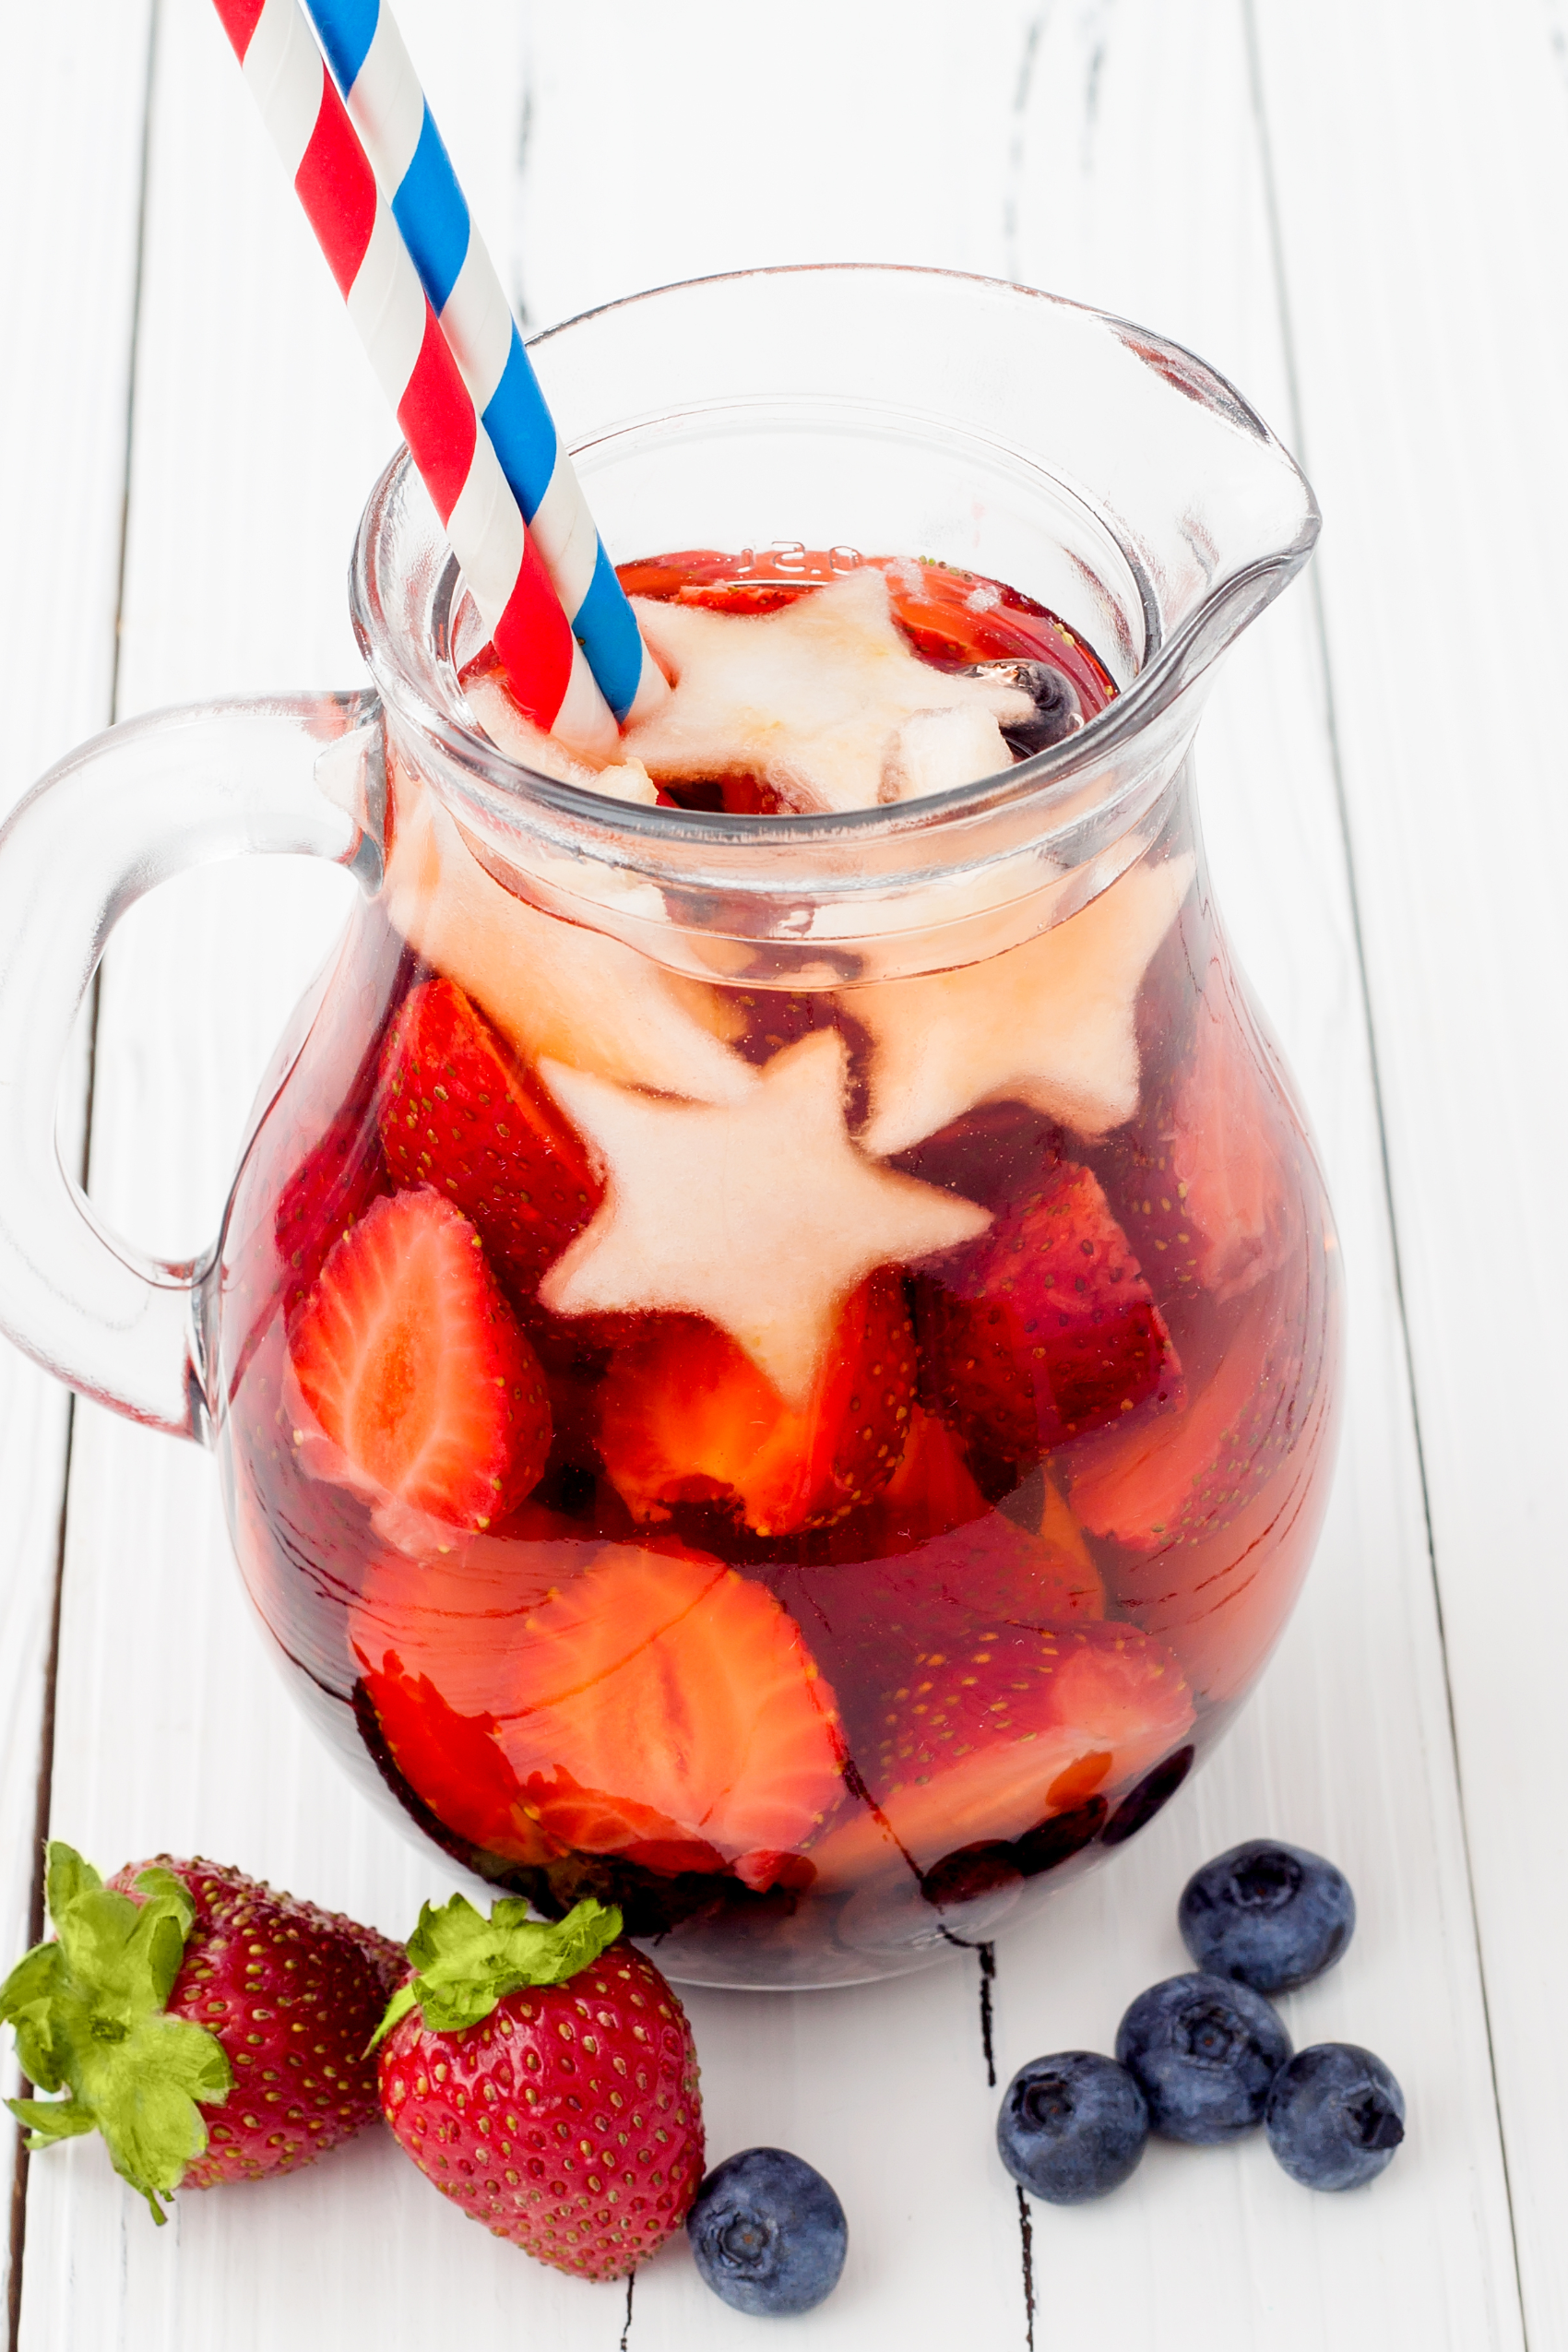 A glass pitcher filled with sliced strawberries and star shaped apples topped with two straws on a white wooden background with strawberries and blueberries placed in front of pitcher.